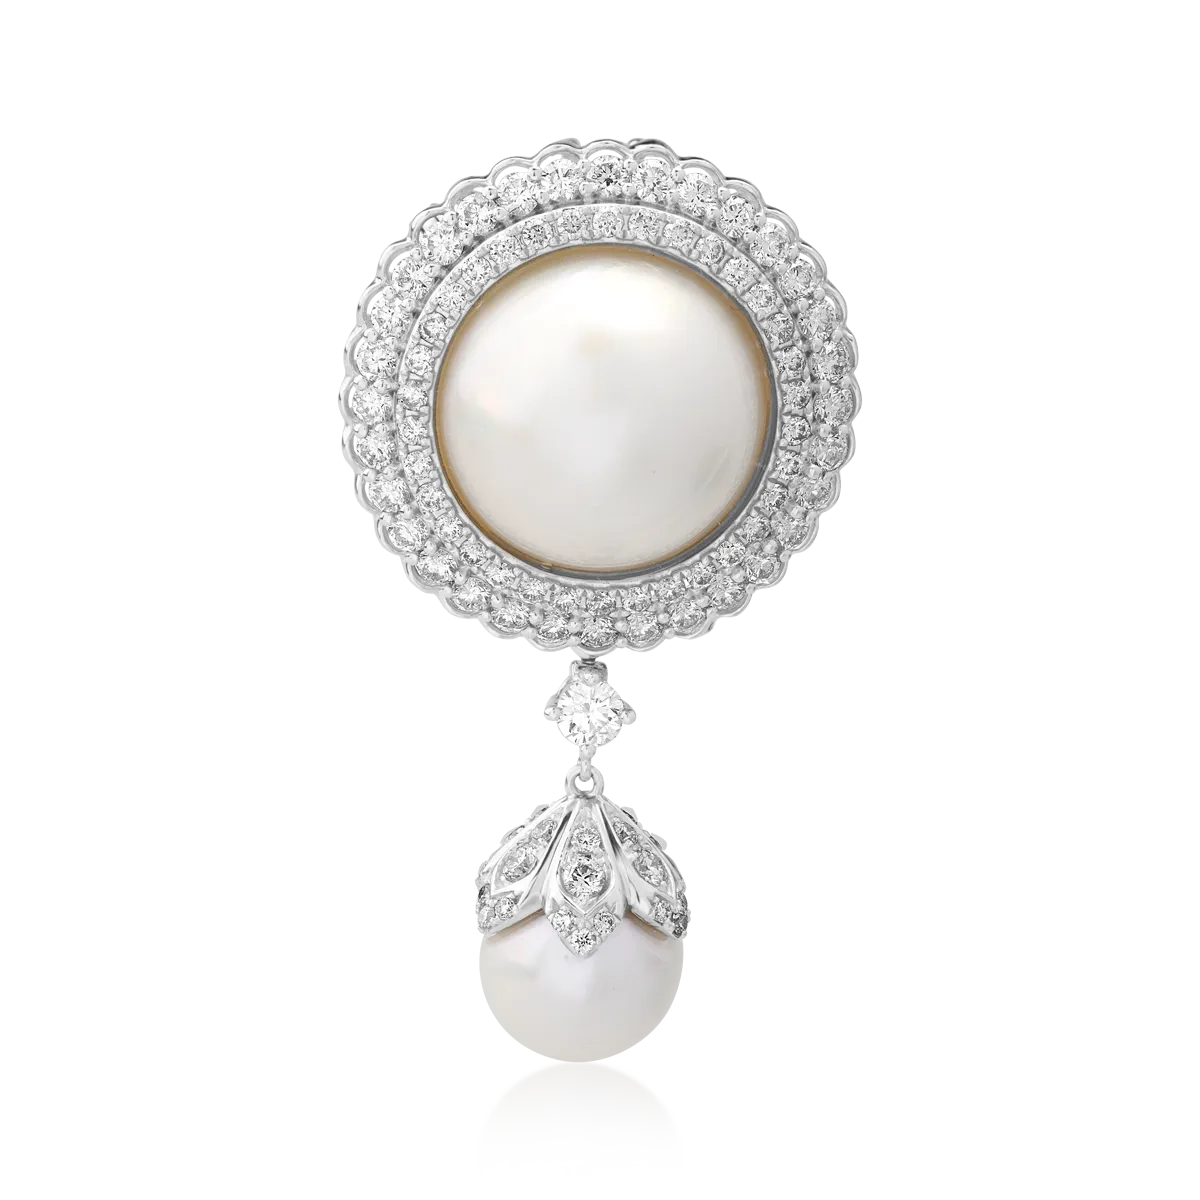 18K white gold brooch with 17.44ct fresh water pearls